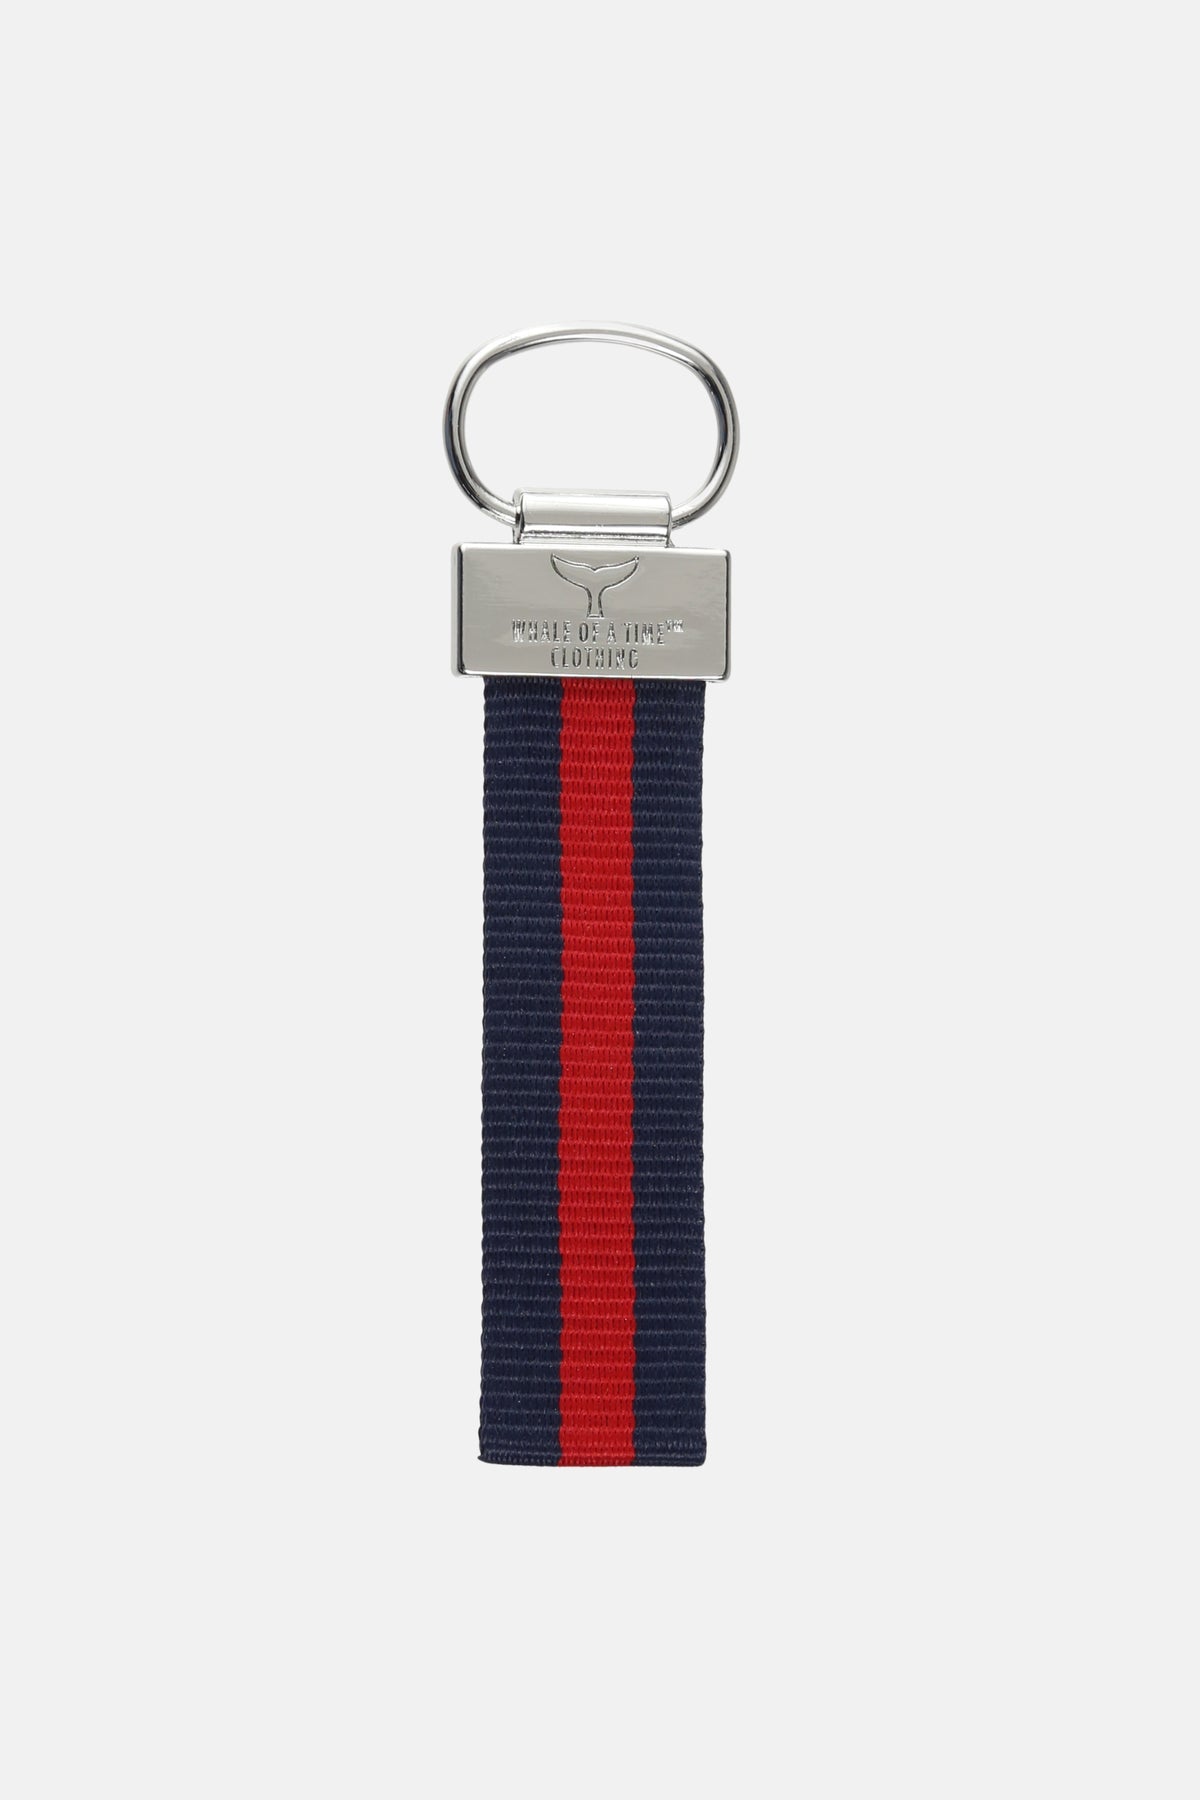 St. Ives Key Ring - Navy/Red - Whale Of A Time Clothing